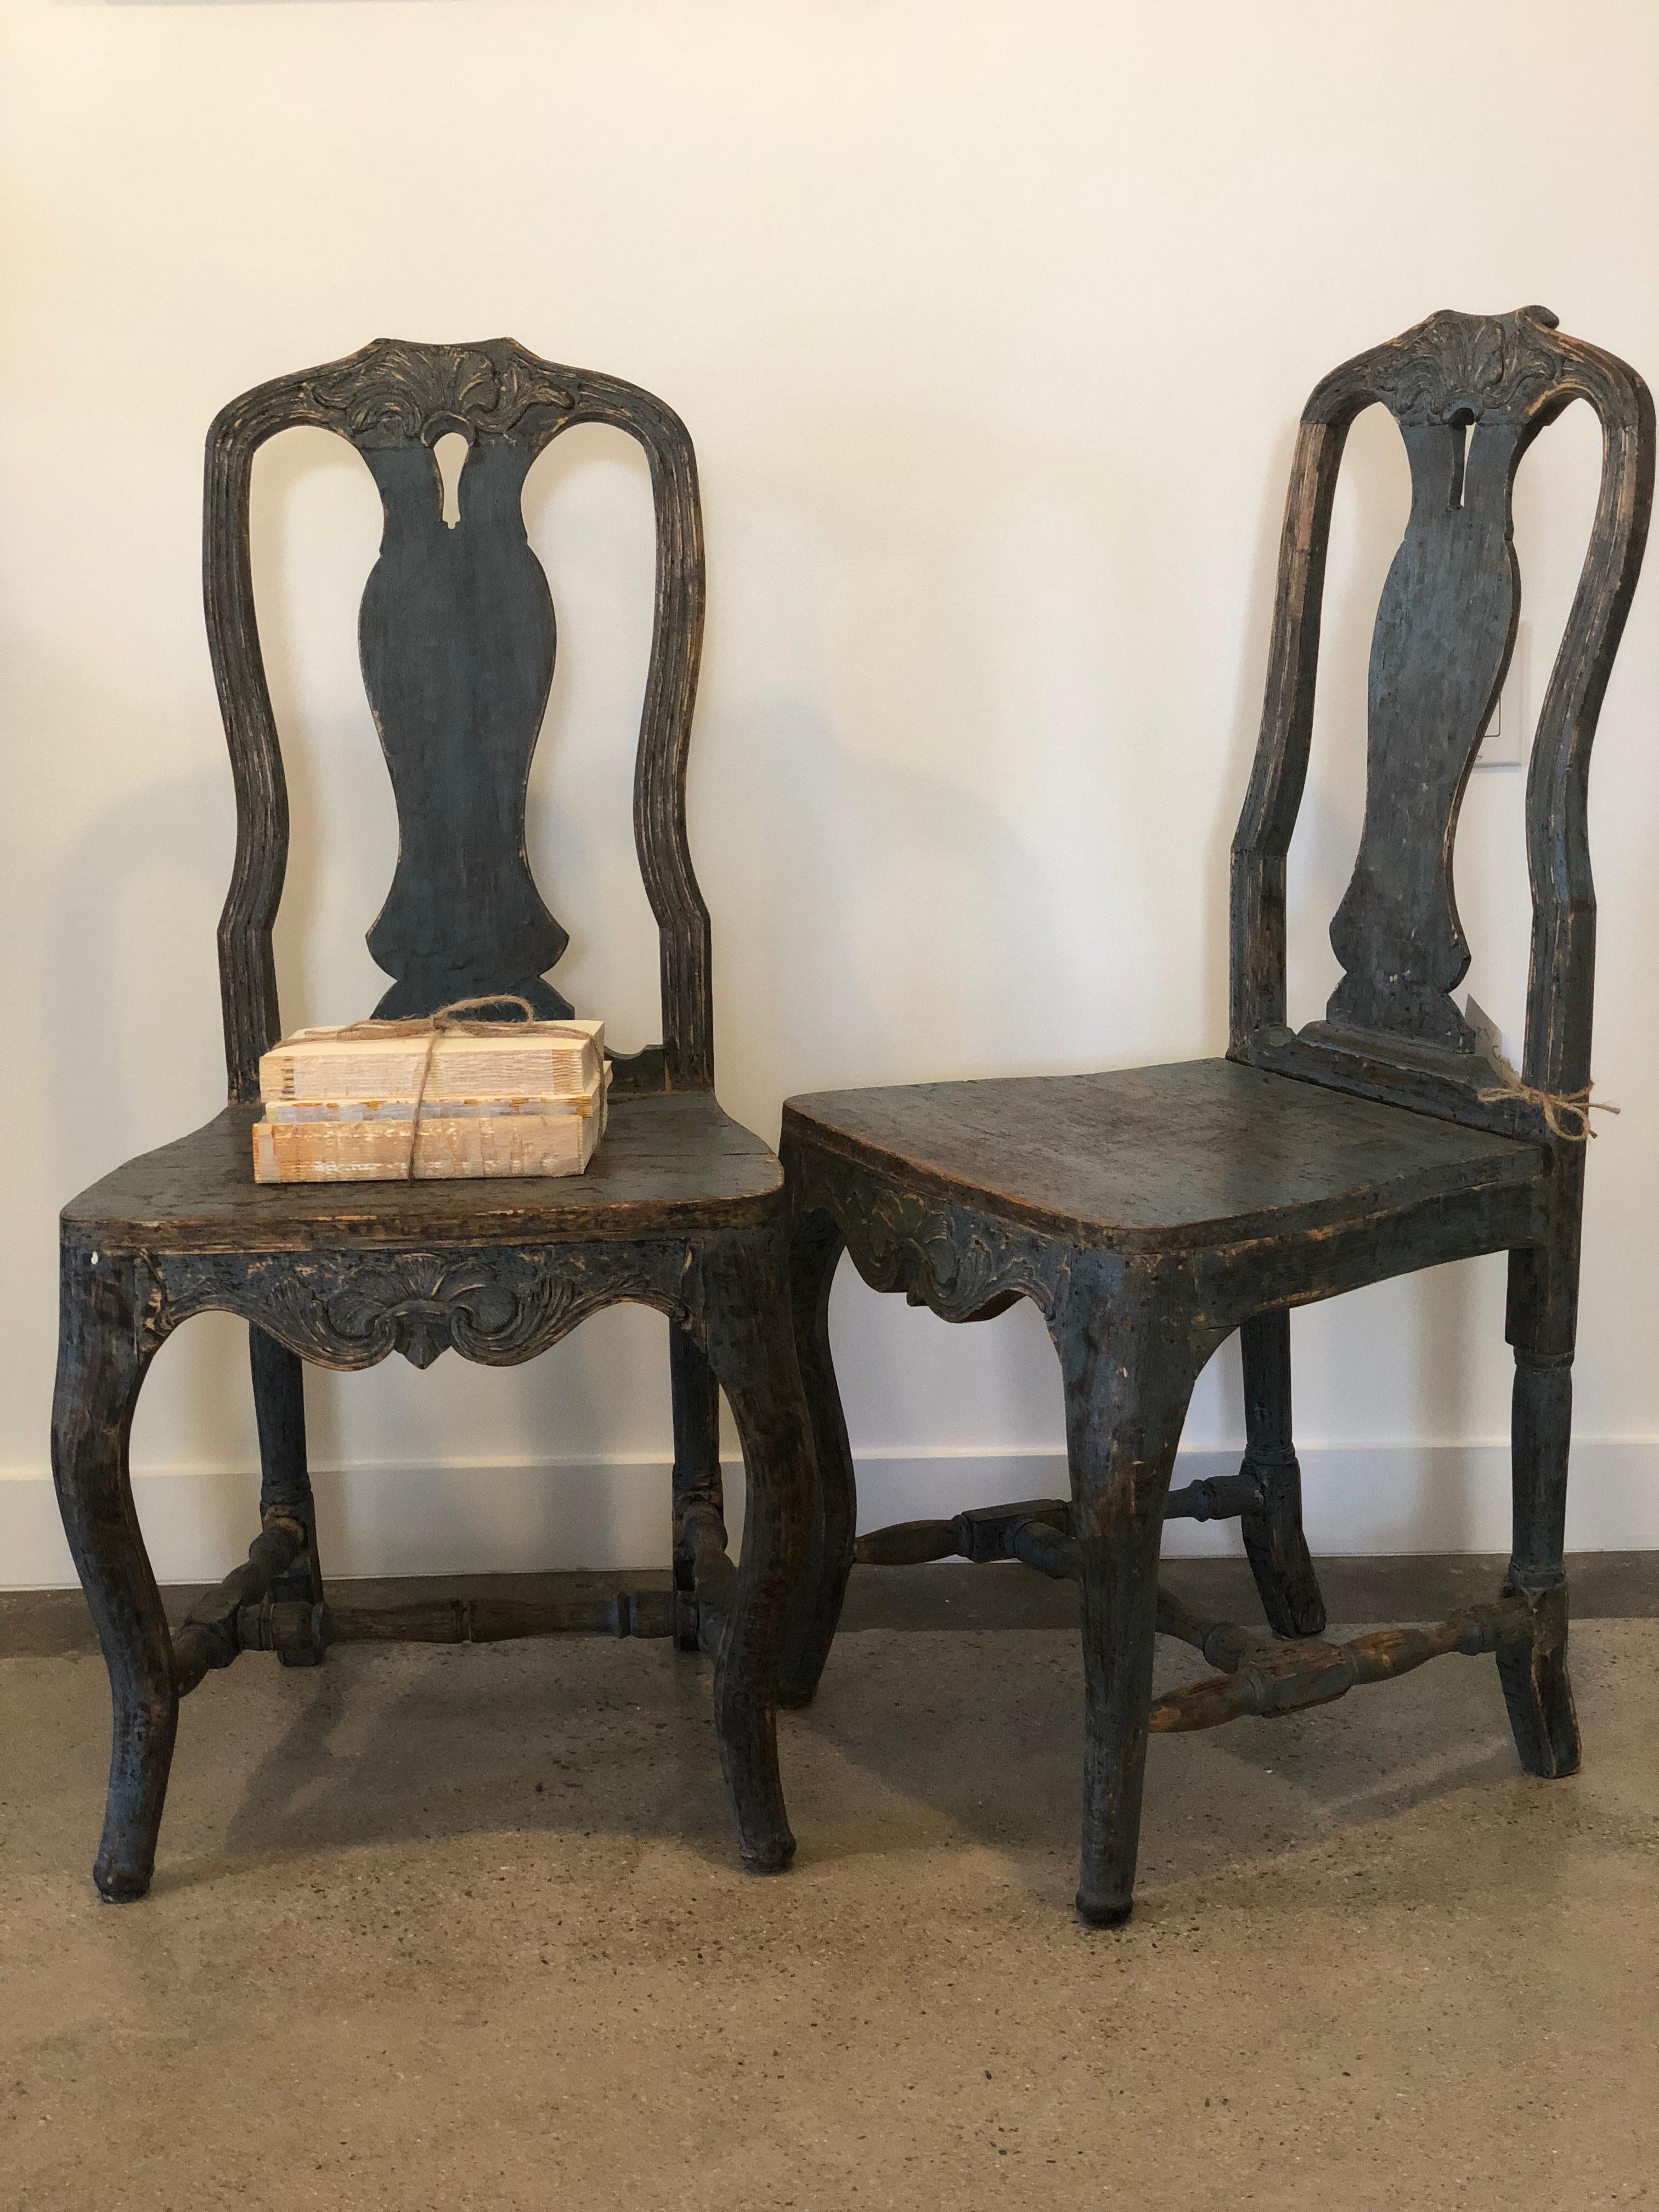 A pair of Swedish Rococo Period chairs from the 18th century in the original beautiful saturated blue color. This pair structurally sound given its age. The blue color has a lovely patina with hints of natural wood showing through. Truly a special